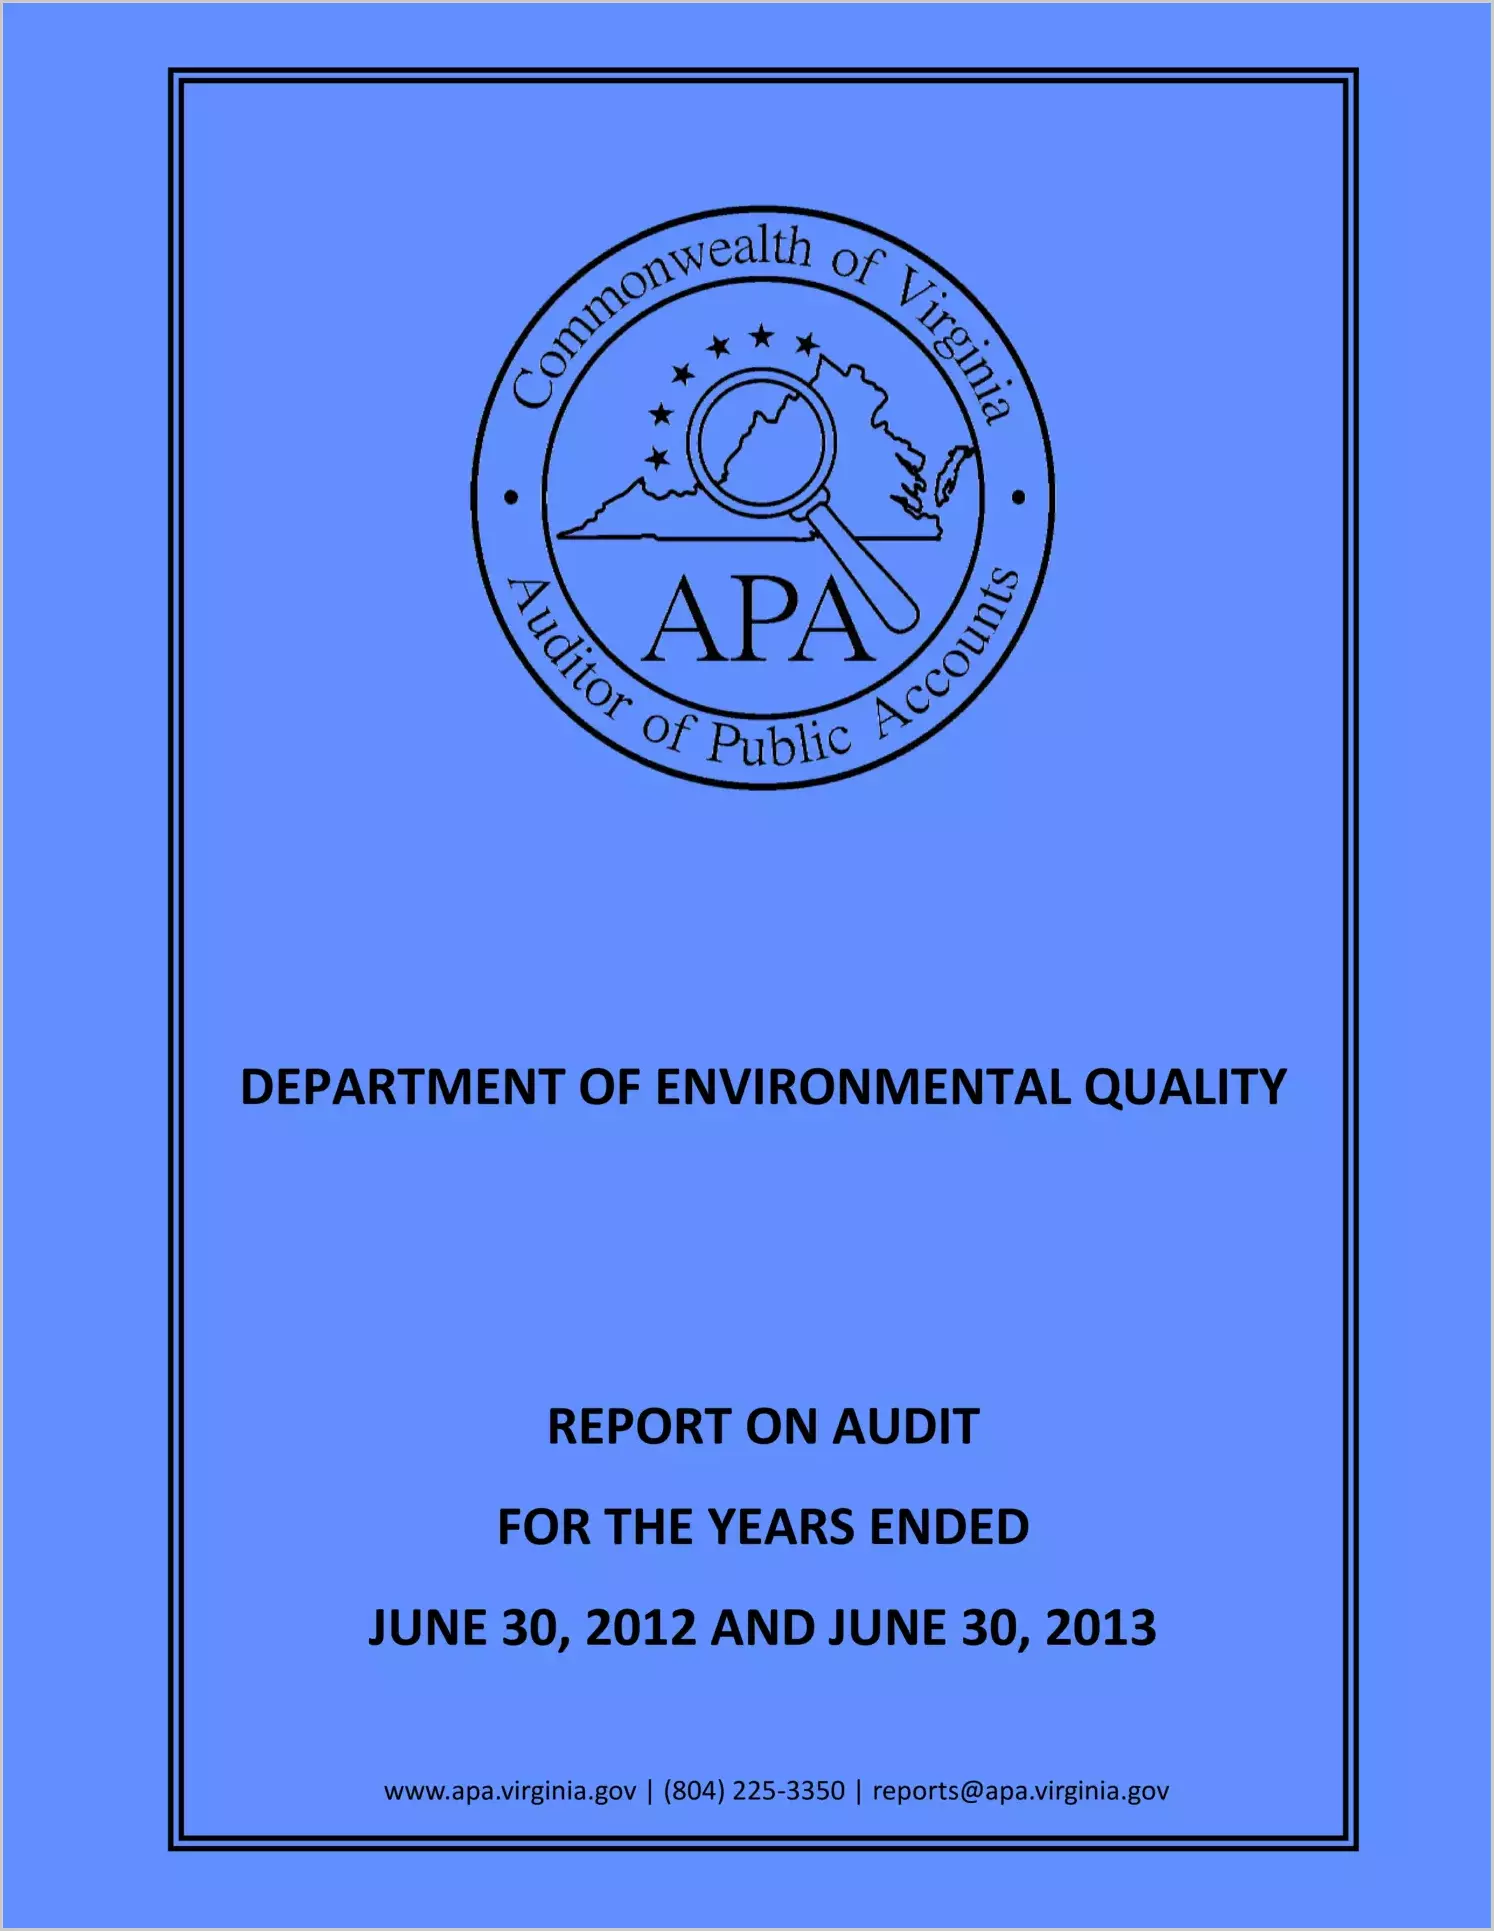 Department of Environmental Quality - for years ending June 30, 2012 and June 30, 2013